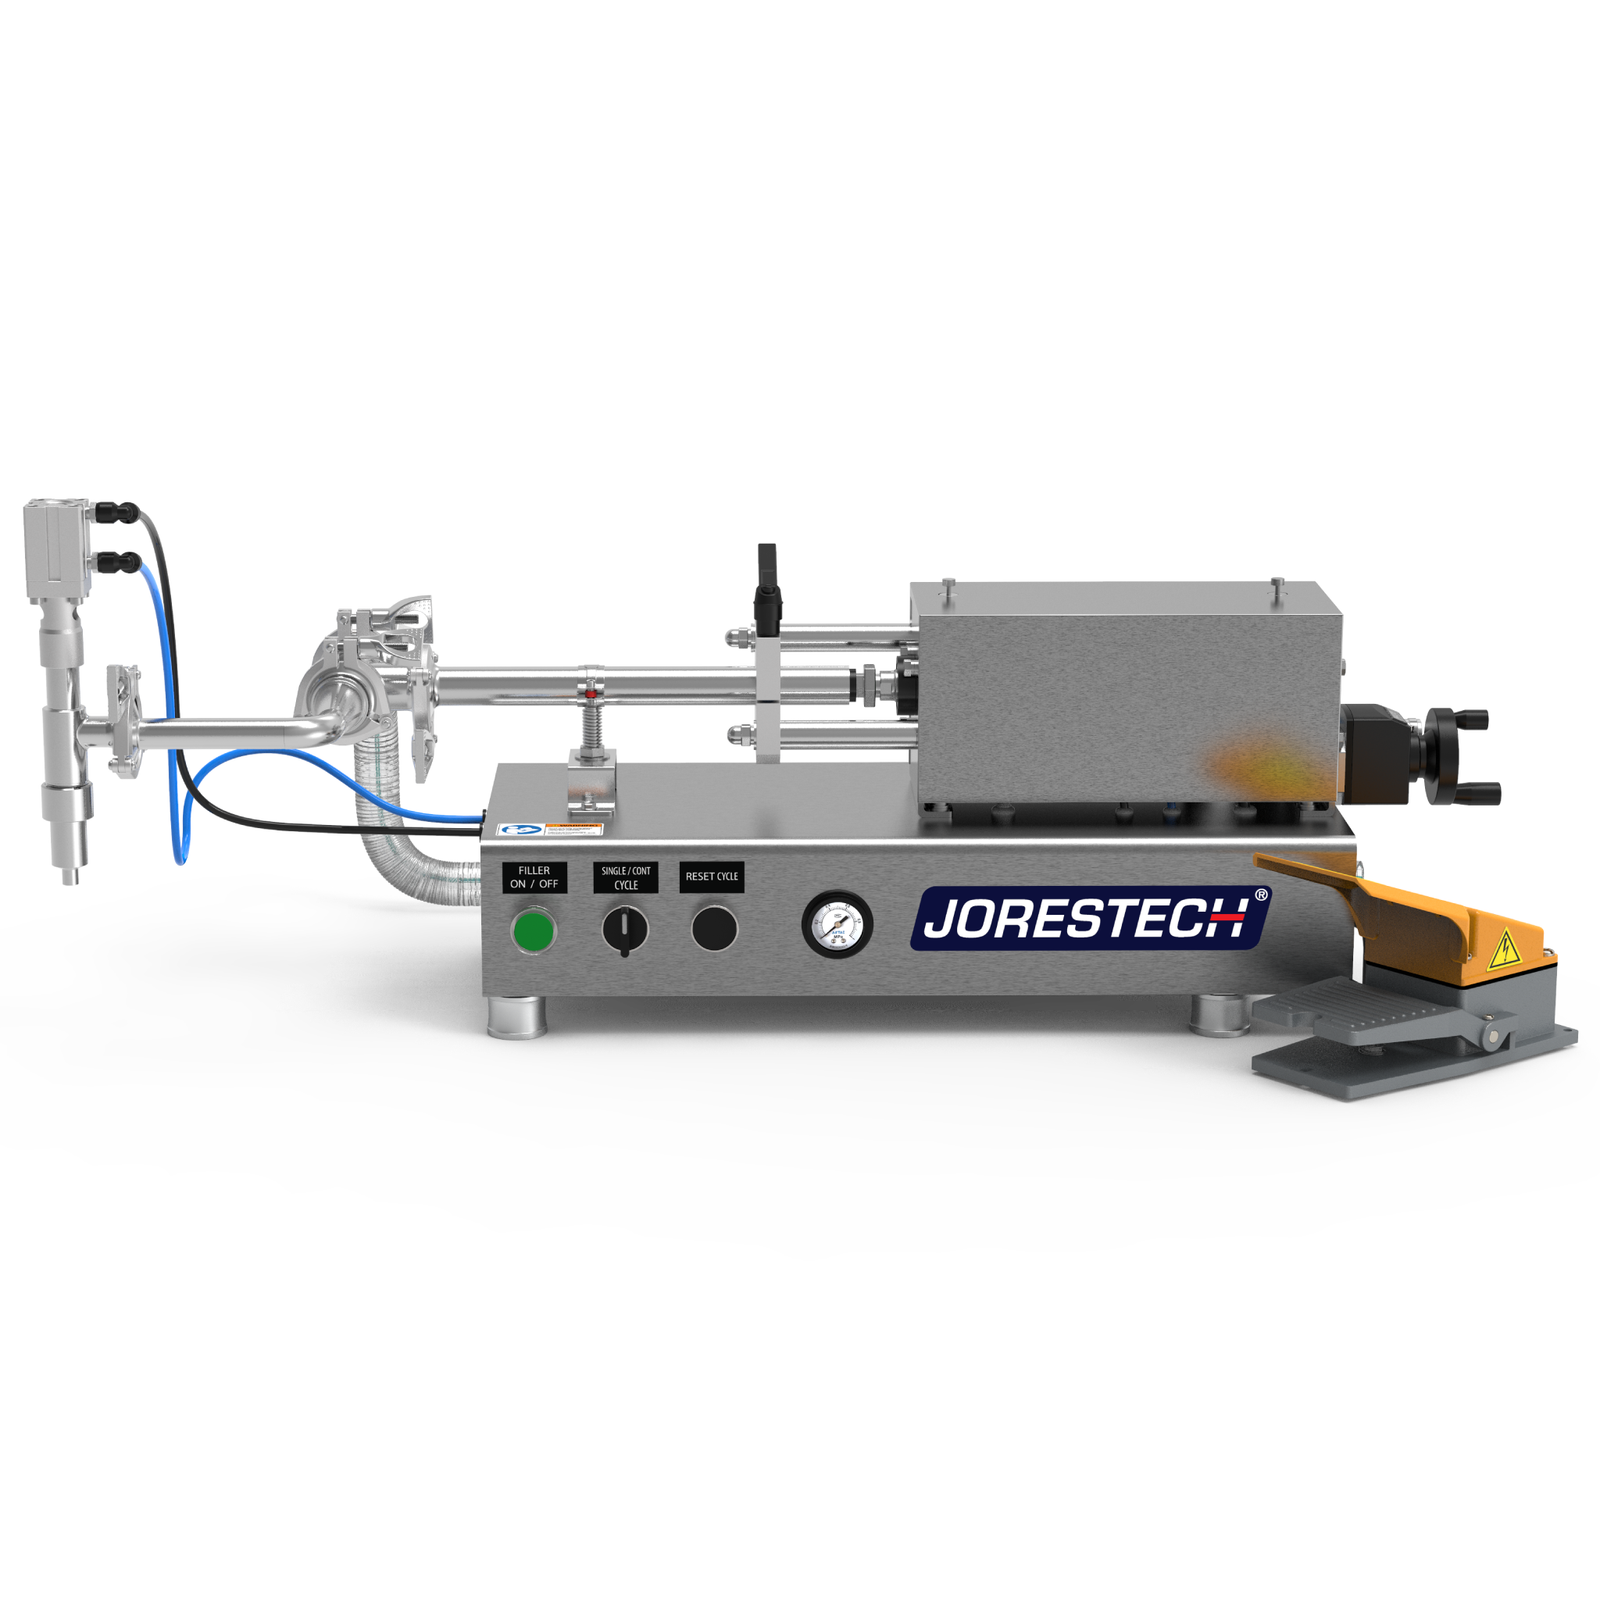 Tabletop Bag Sealing Machine with Pedal Activation | Technopack Corp. by JORES Technologies